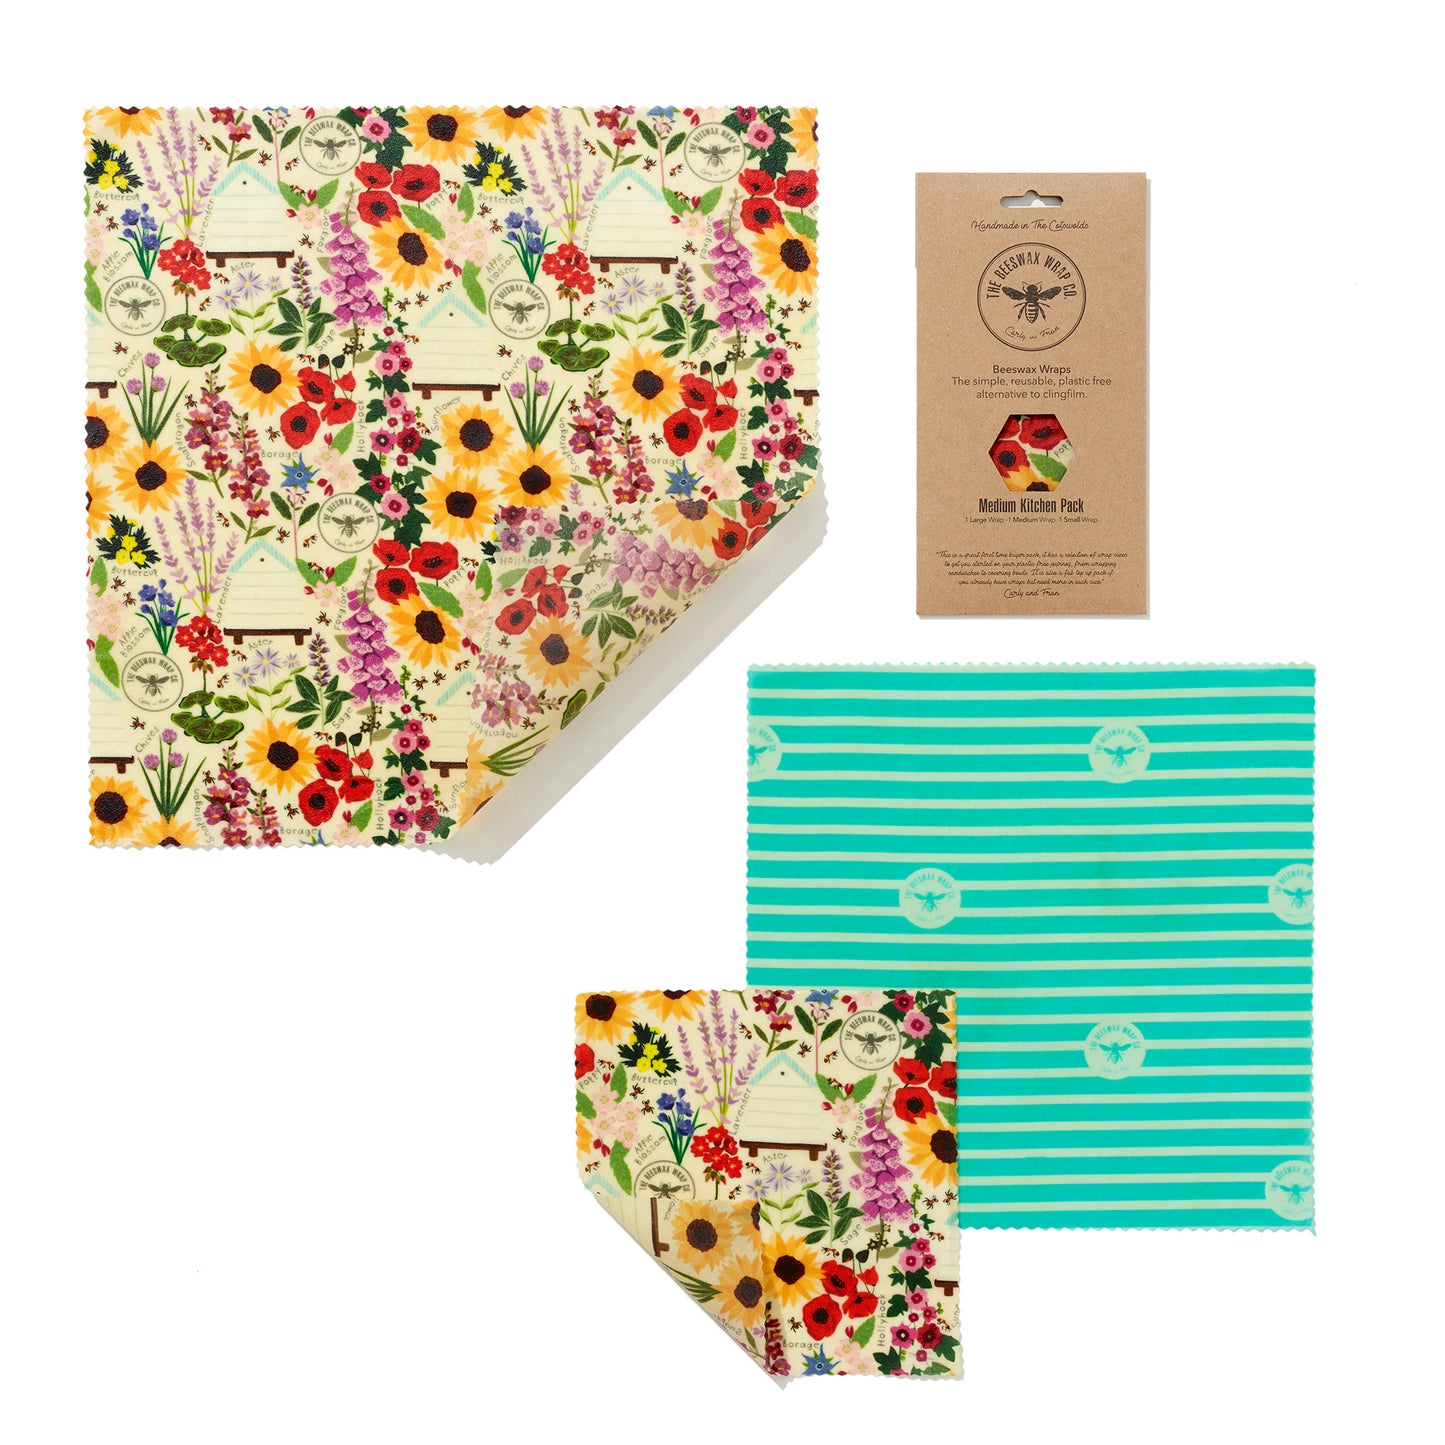 Floral Print Beeswax Wraps